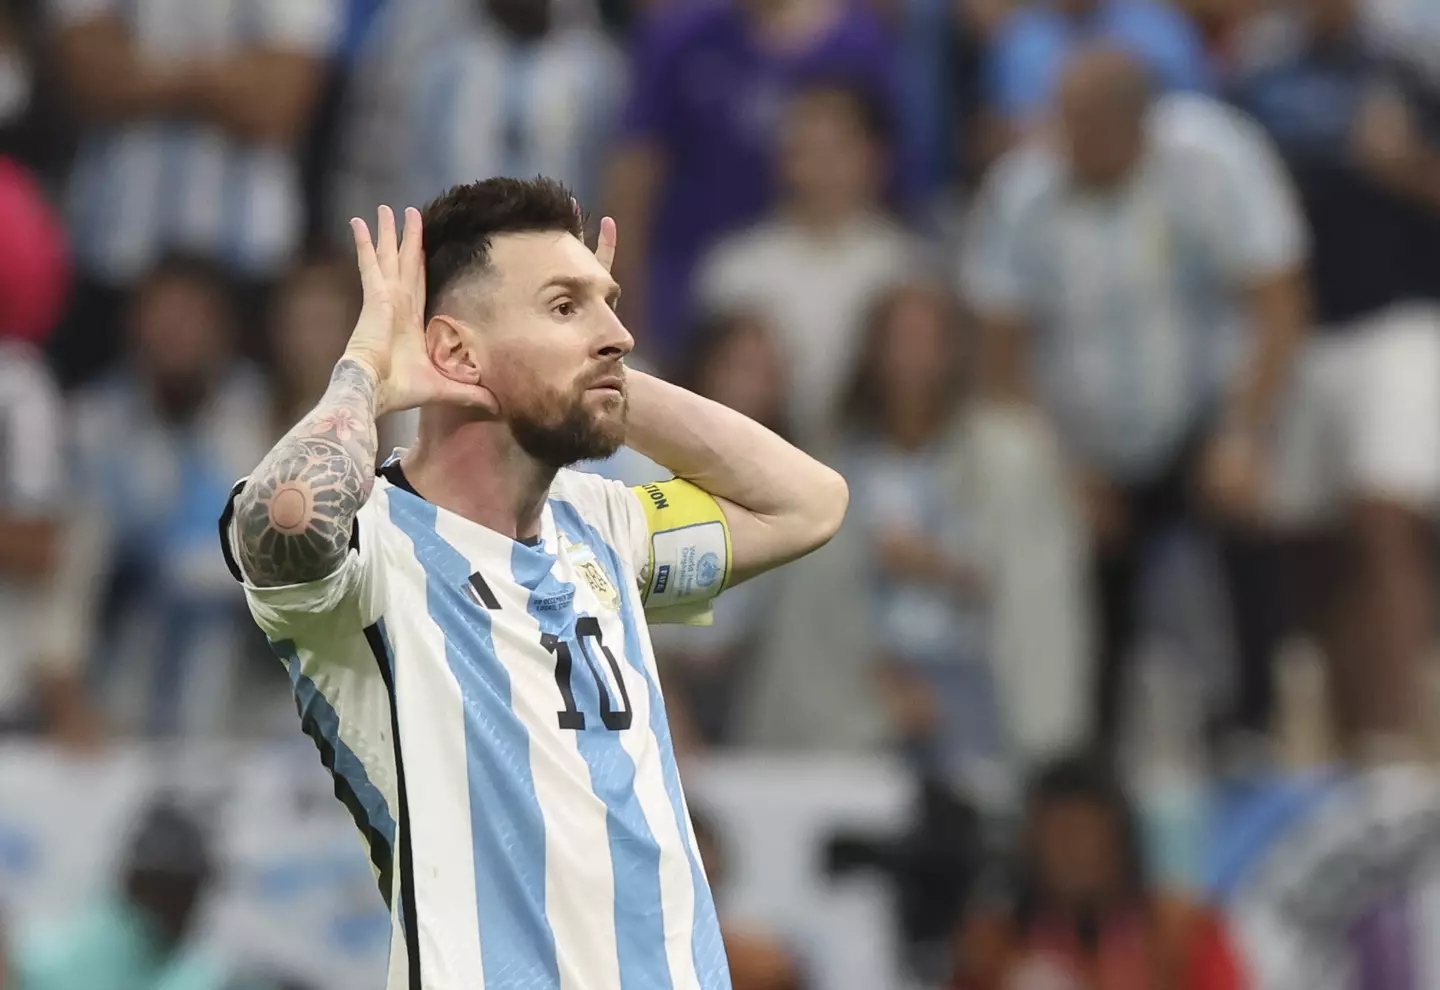 Messi during the World Cup. (Image